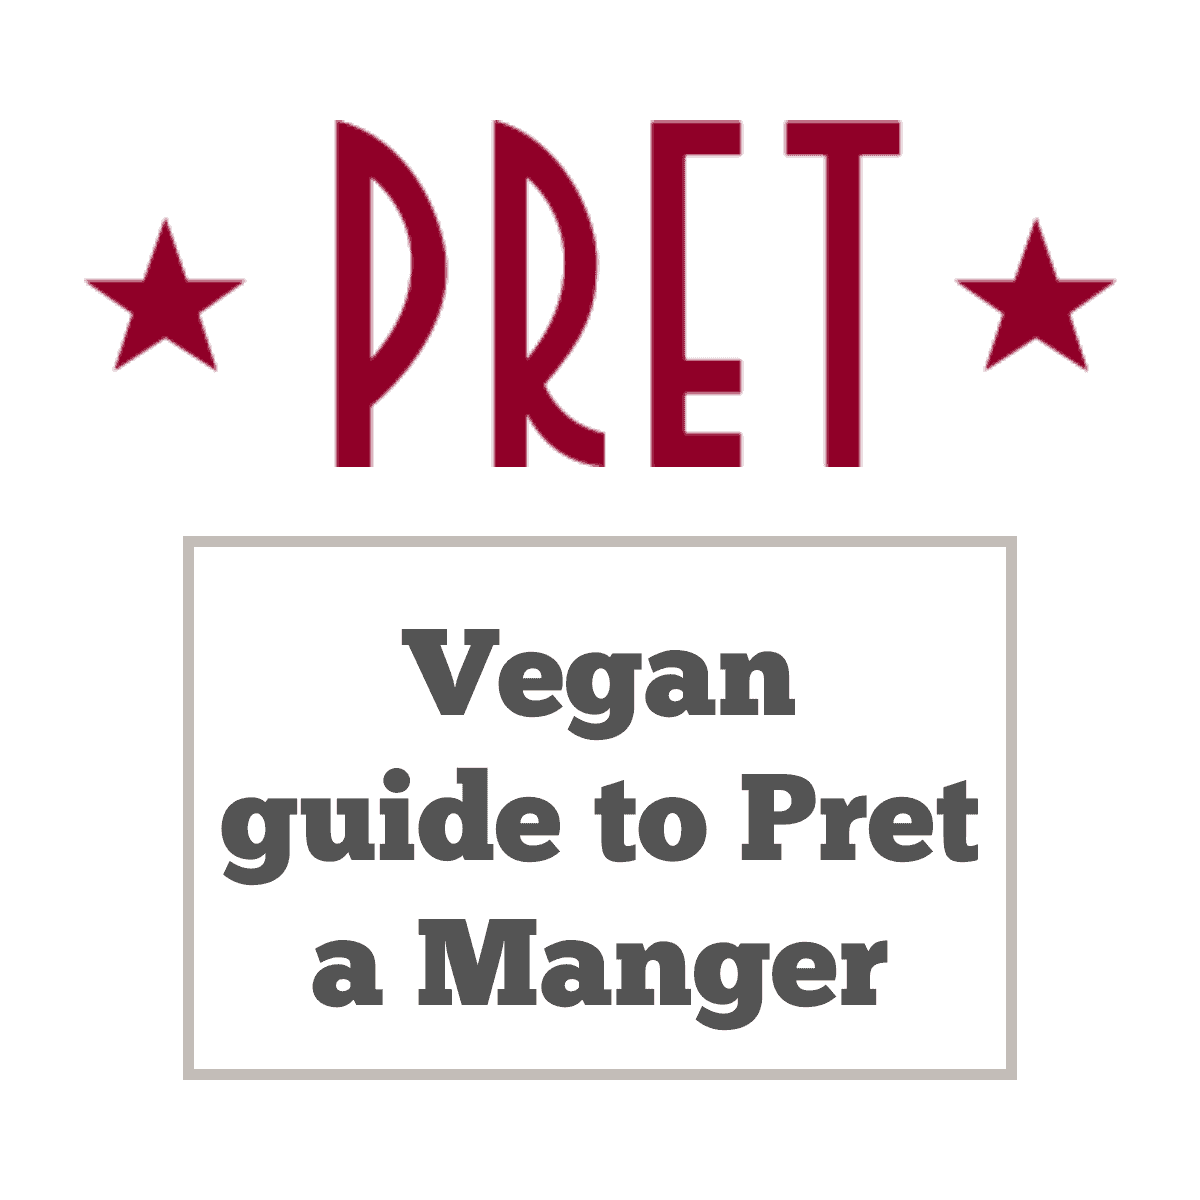 Guide to Pret featured image.